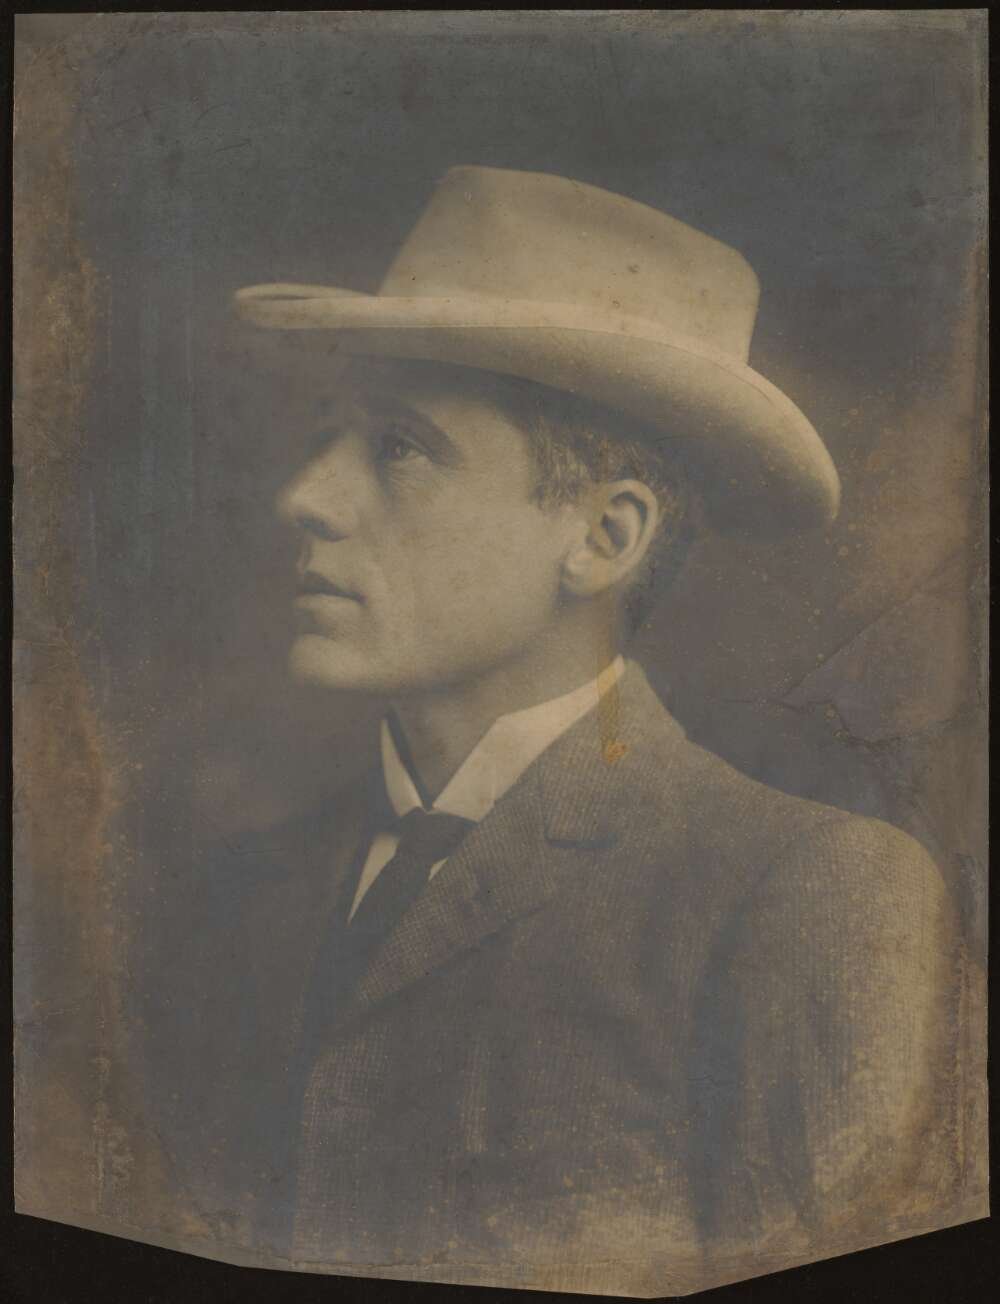 A photograph of Australian poet Banjo Paterson in side profile. He wears a hat and a suit jacket.